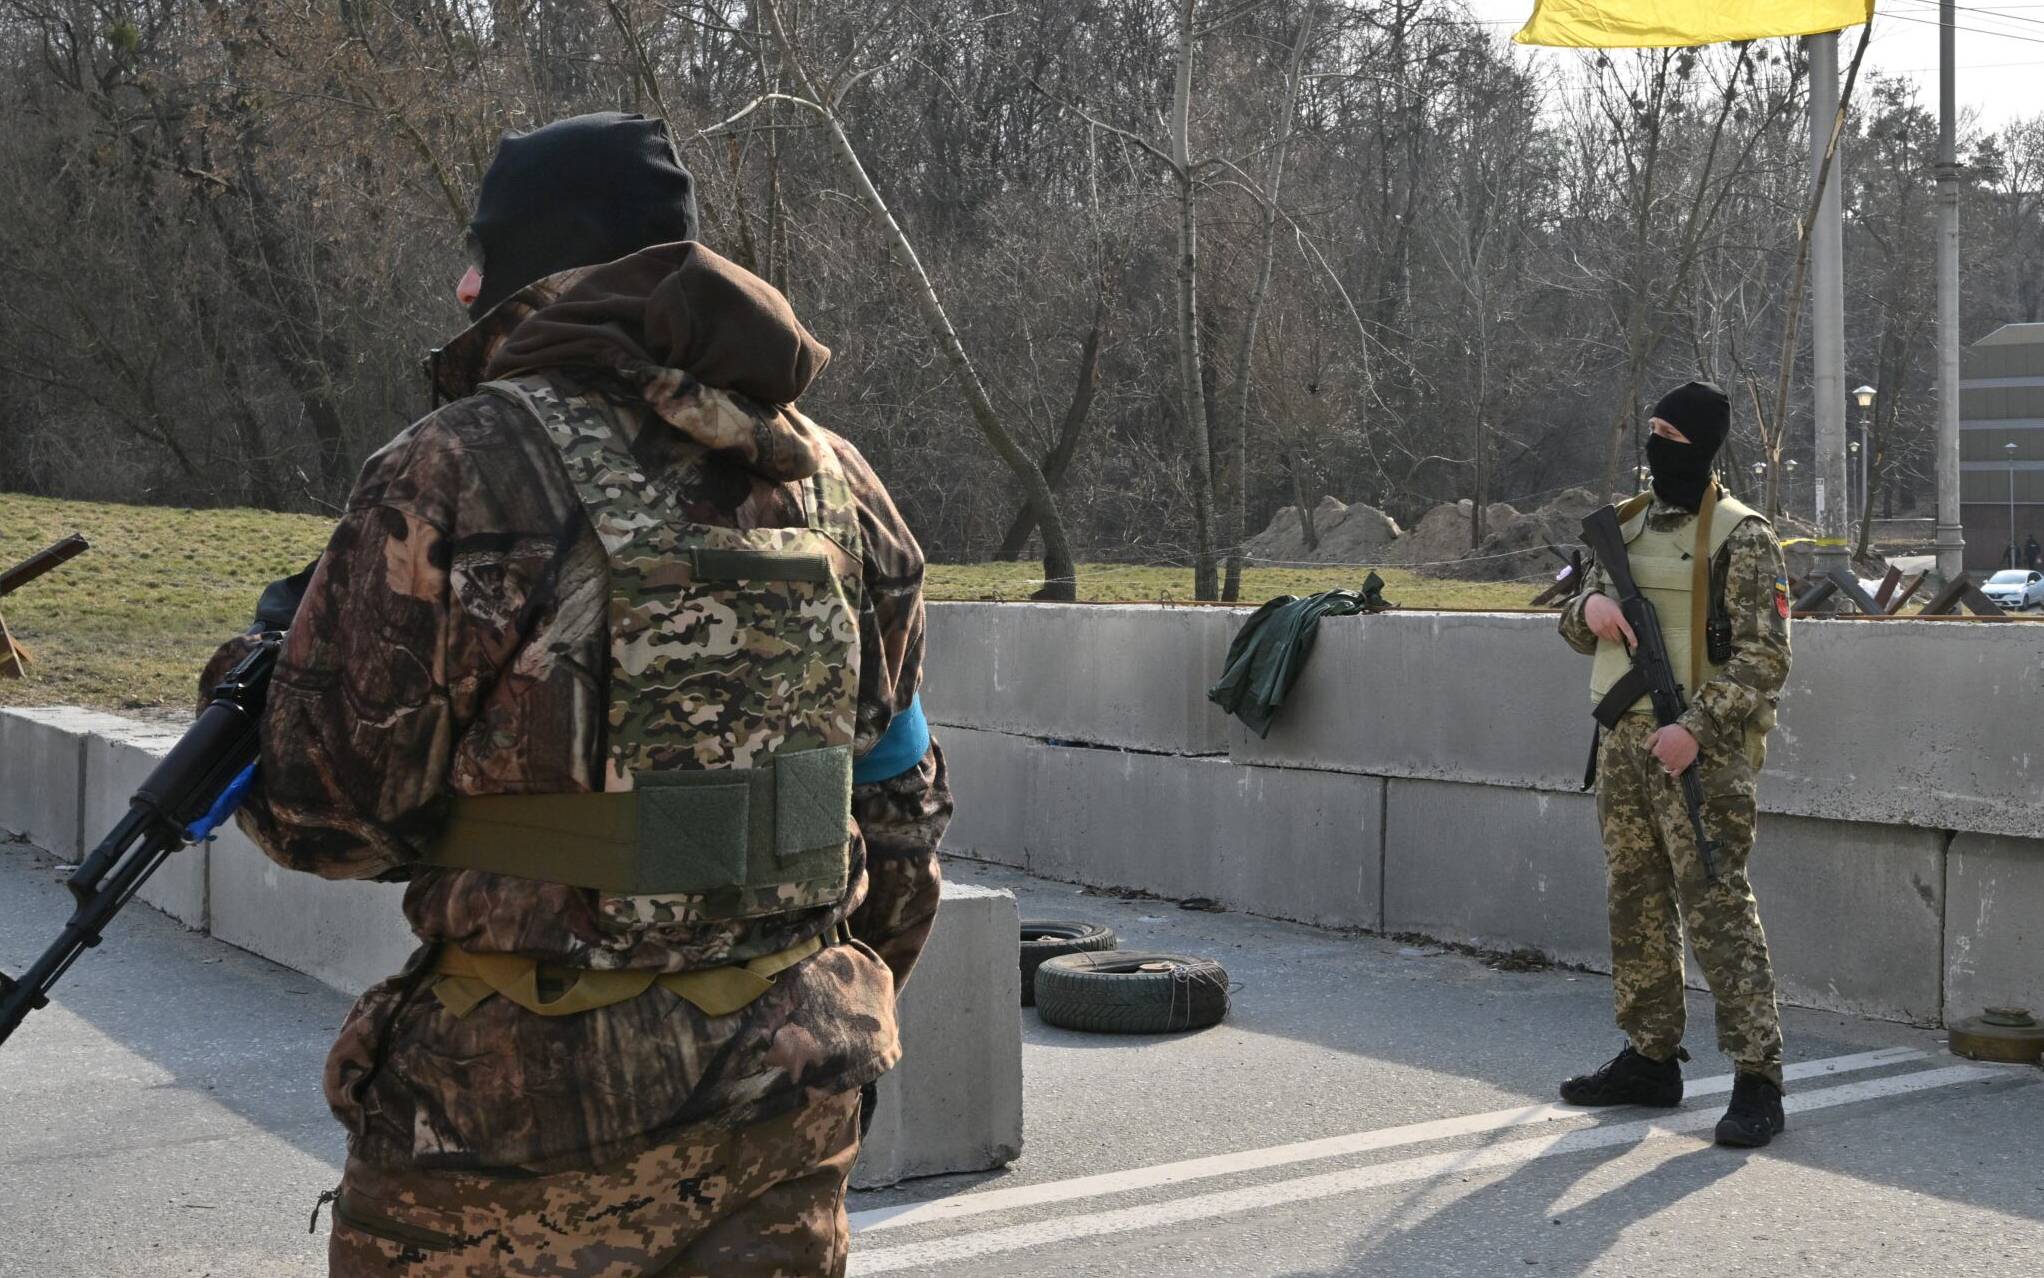 Ukrainian soldiers stand guard at a checkpoint in the outskirt of Kyiv on March 28, 2022. (Photo by Sergei SUPINSKY / AFP)